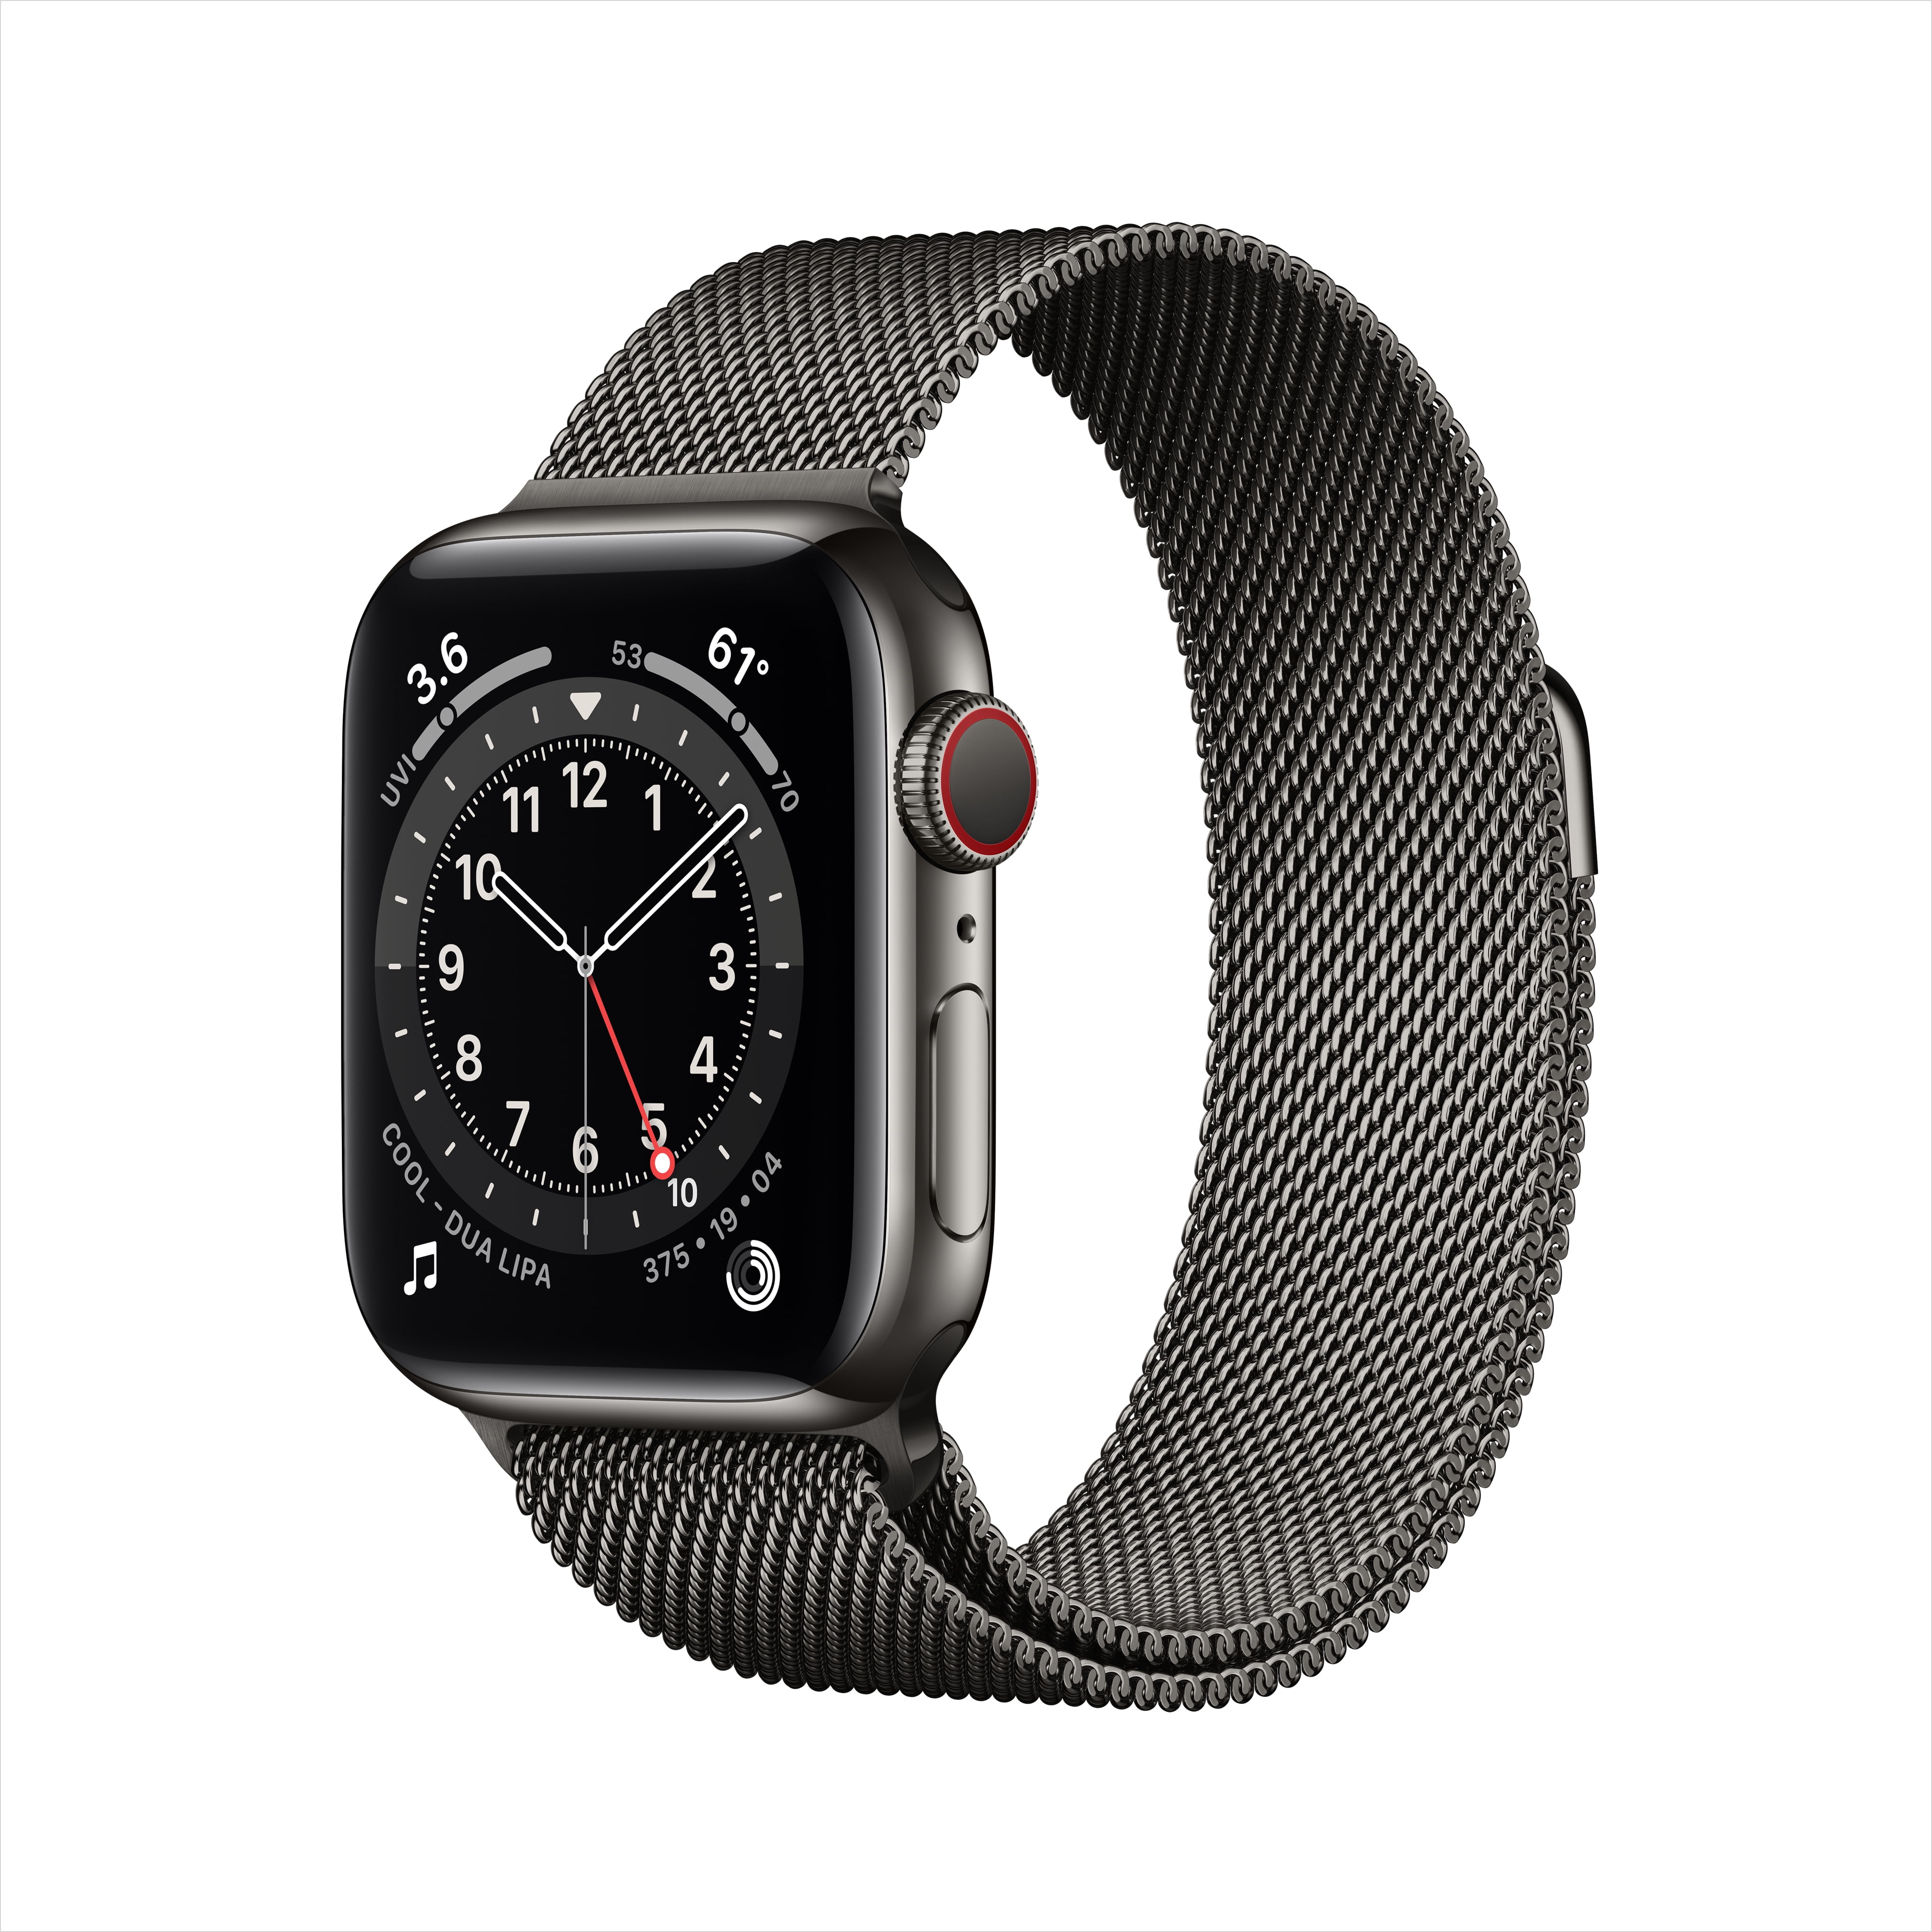 Apple Watch Series 6 GPS + Cellular, 40mm Graphite Stainless Steel Case